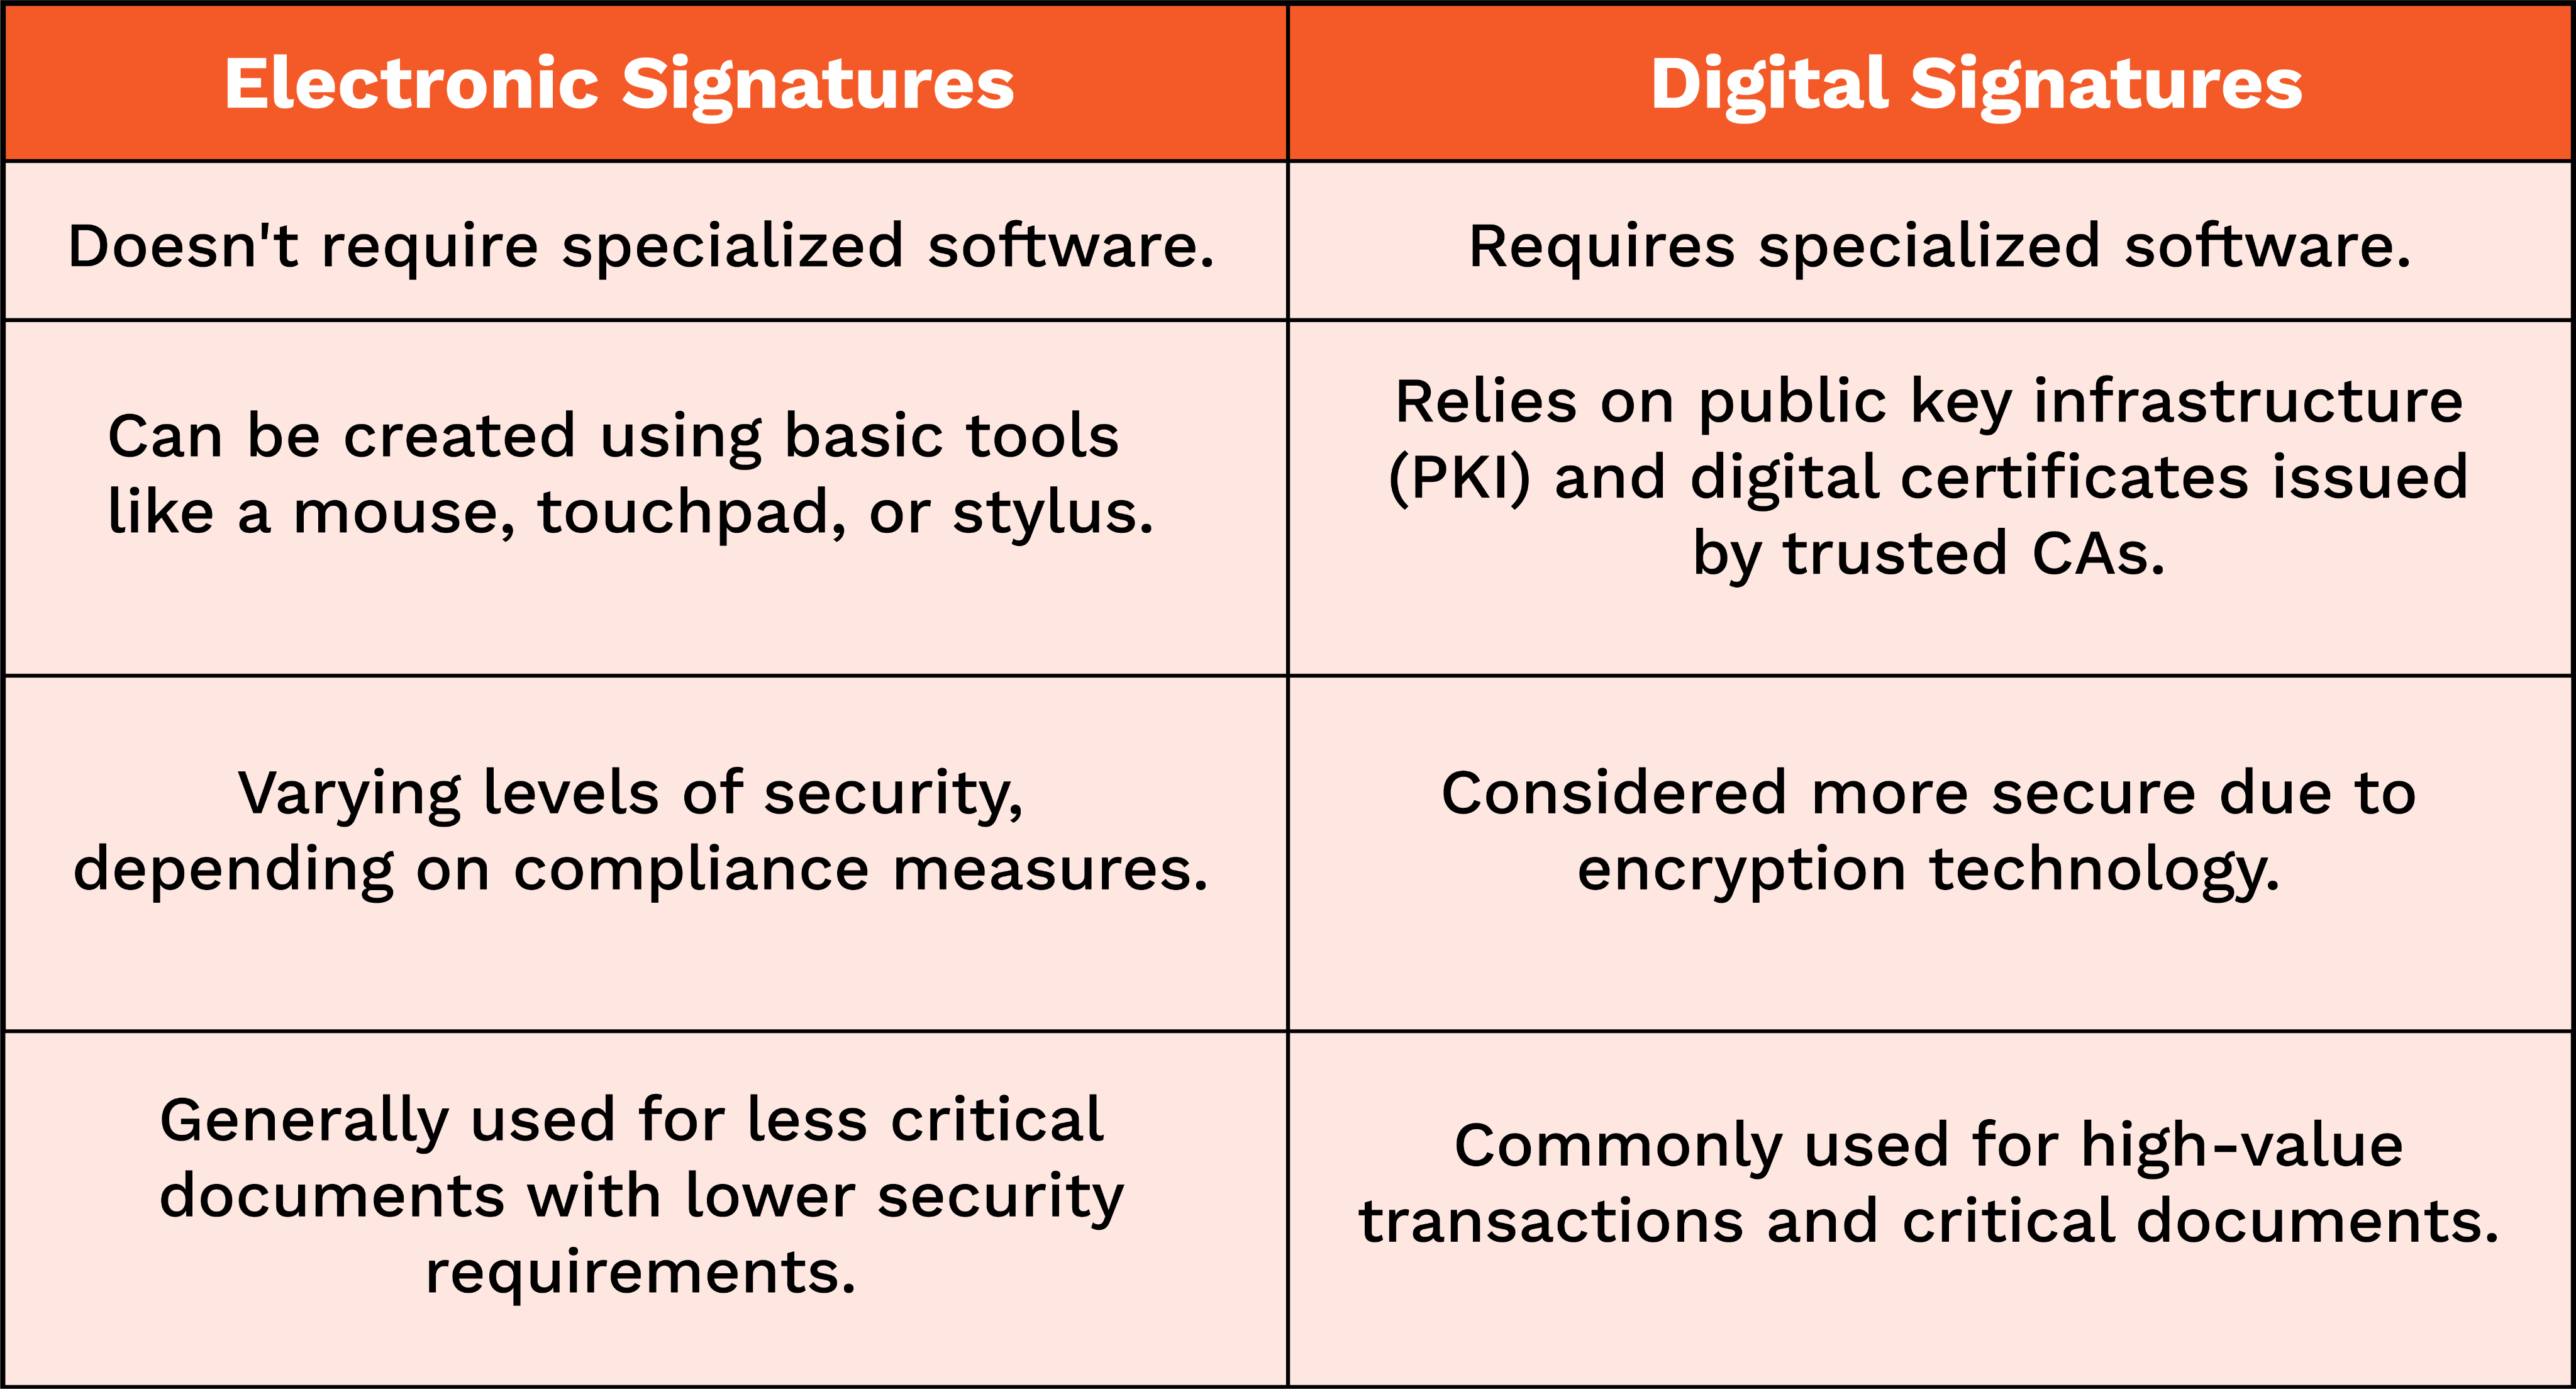 Learn the difference between an electronic signature and digital signature from this table.